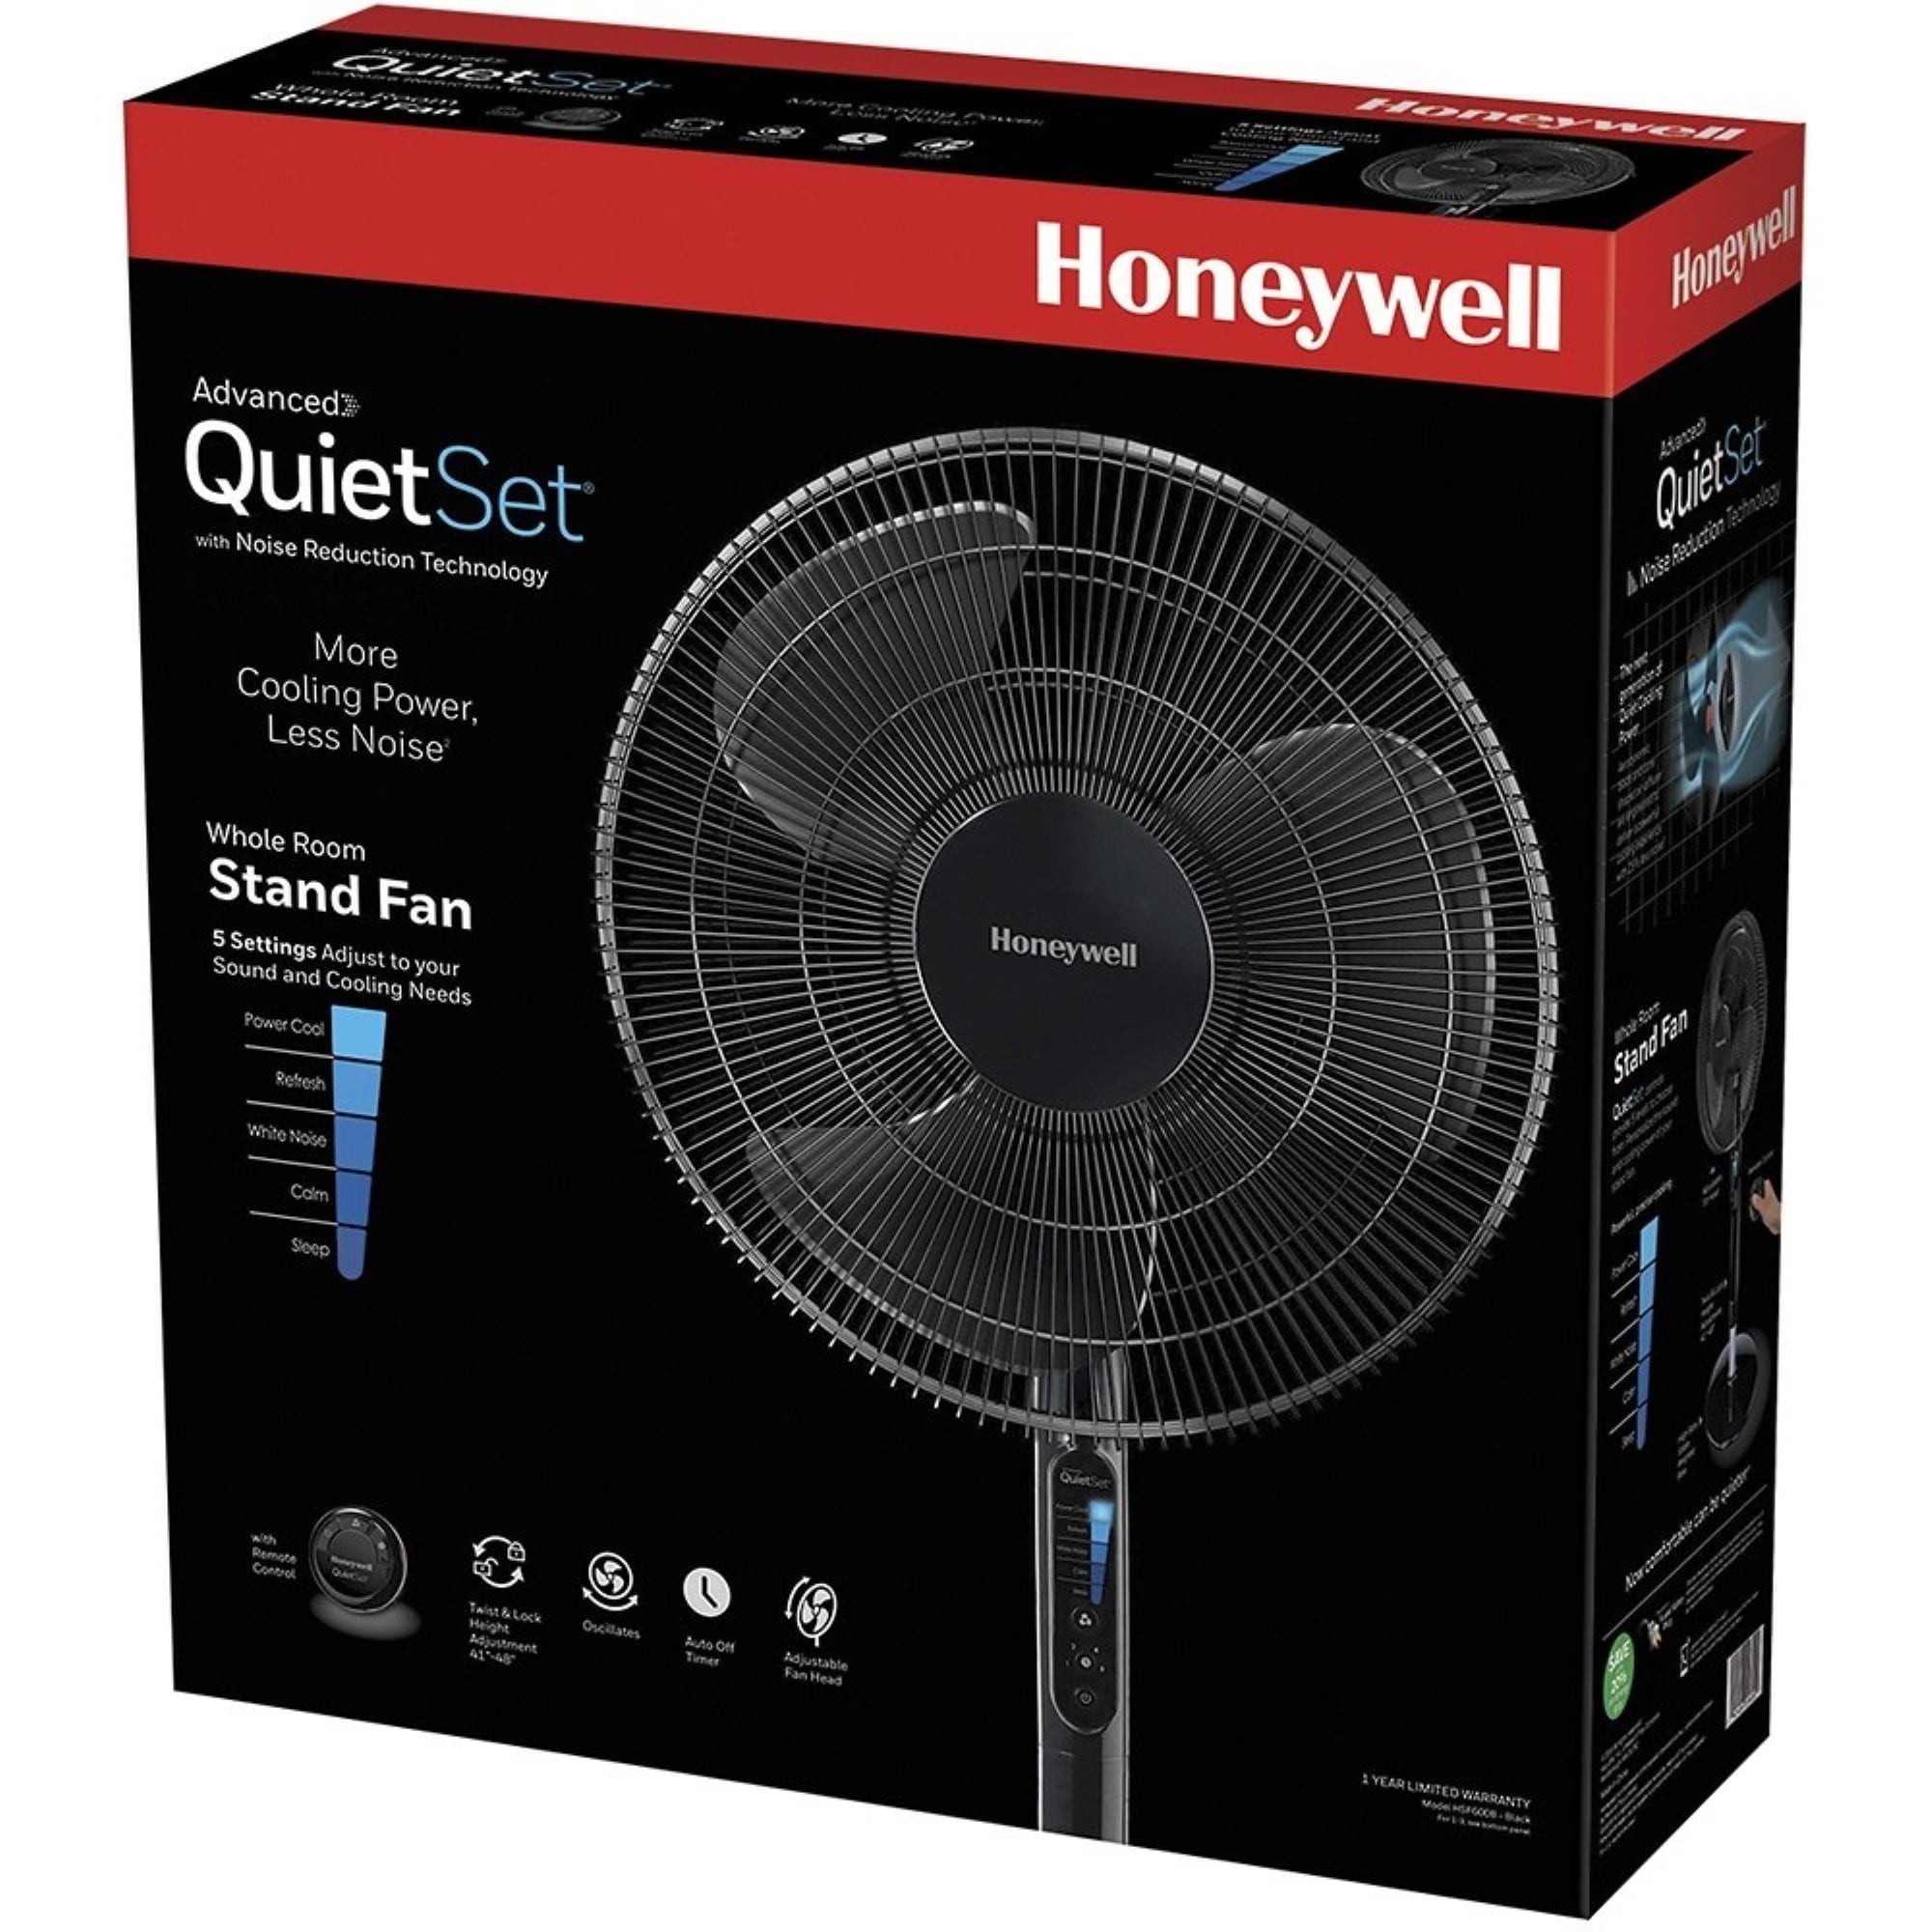 Honeywell Advanced QuietSet with Noise Reduction Technology 16 Whole Room Pedestal Fan HSF600B